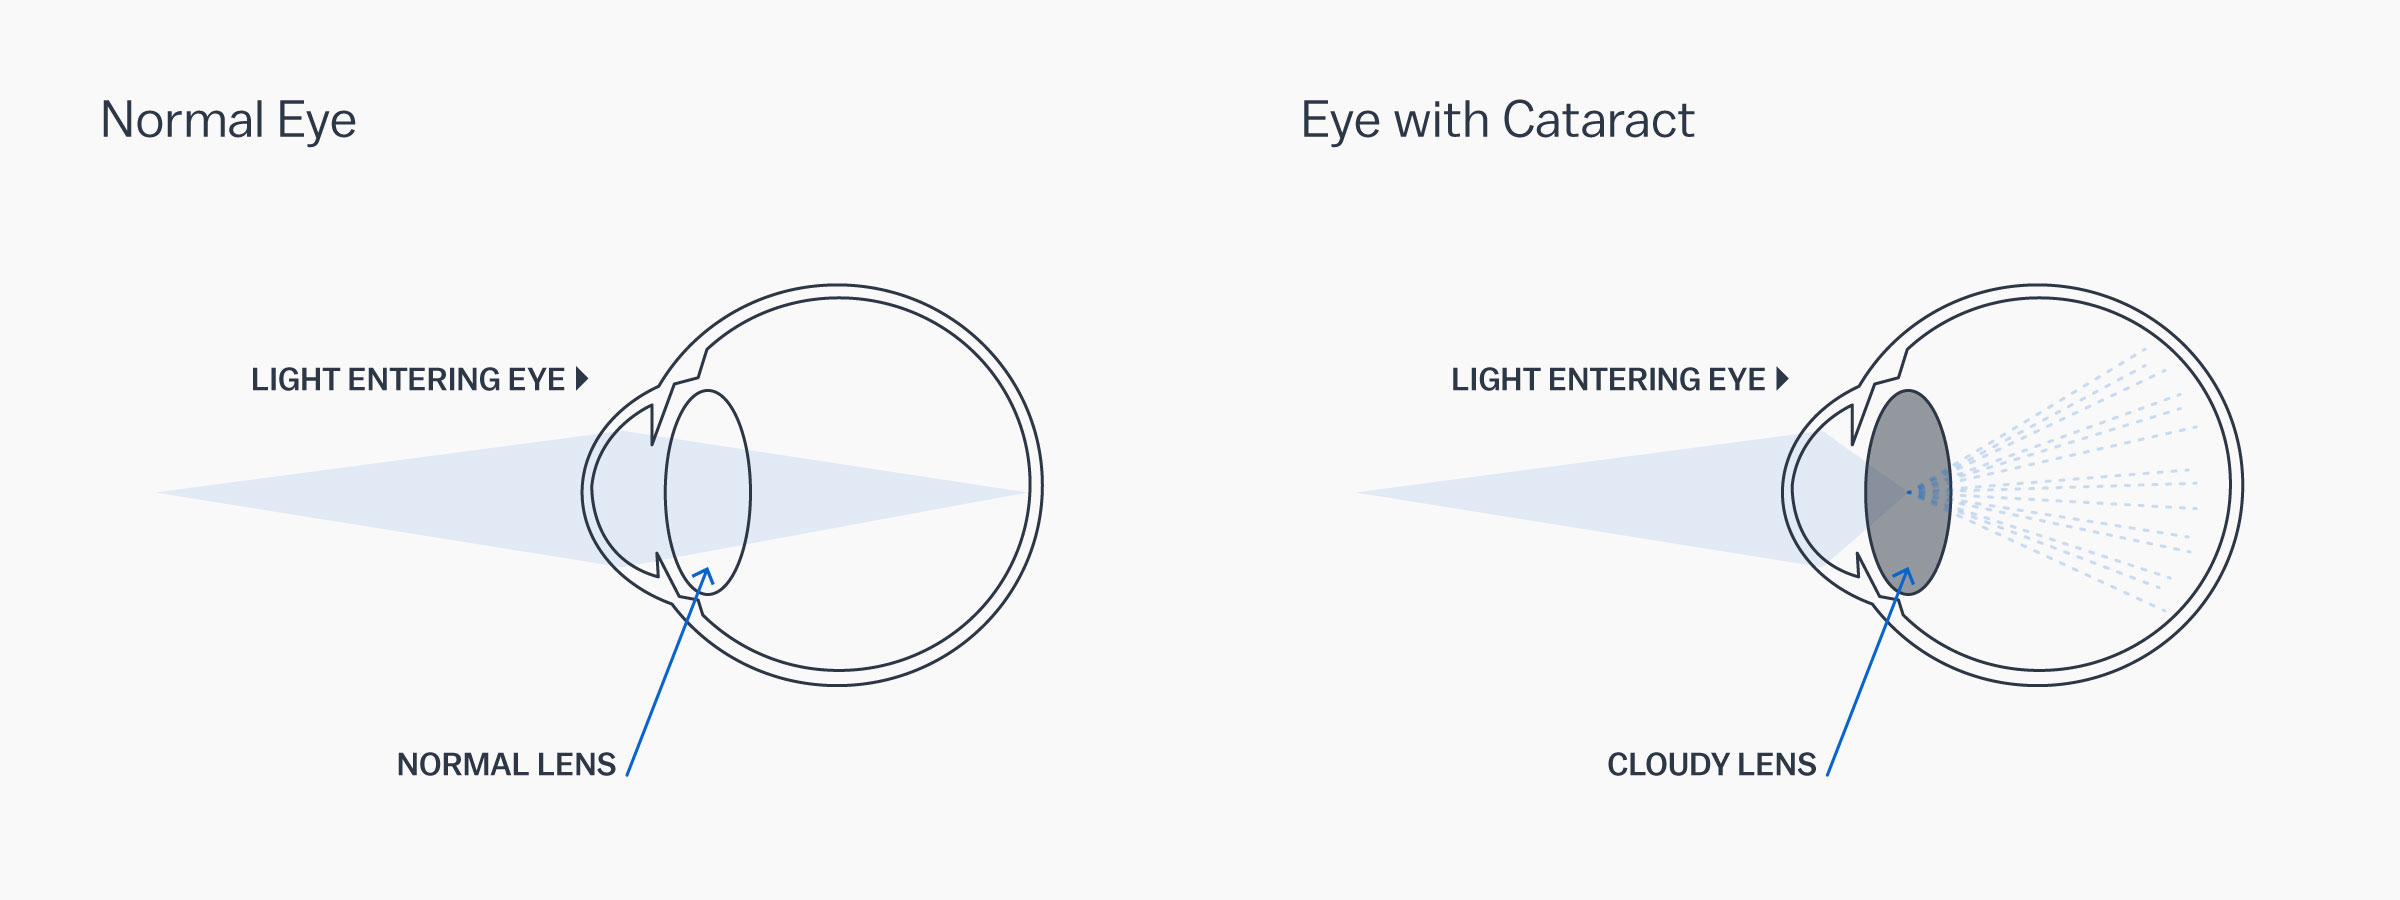 A graphic showing how a cataract affects the eye